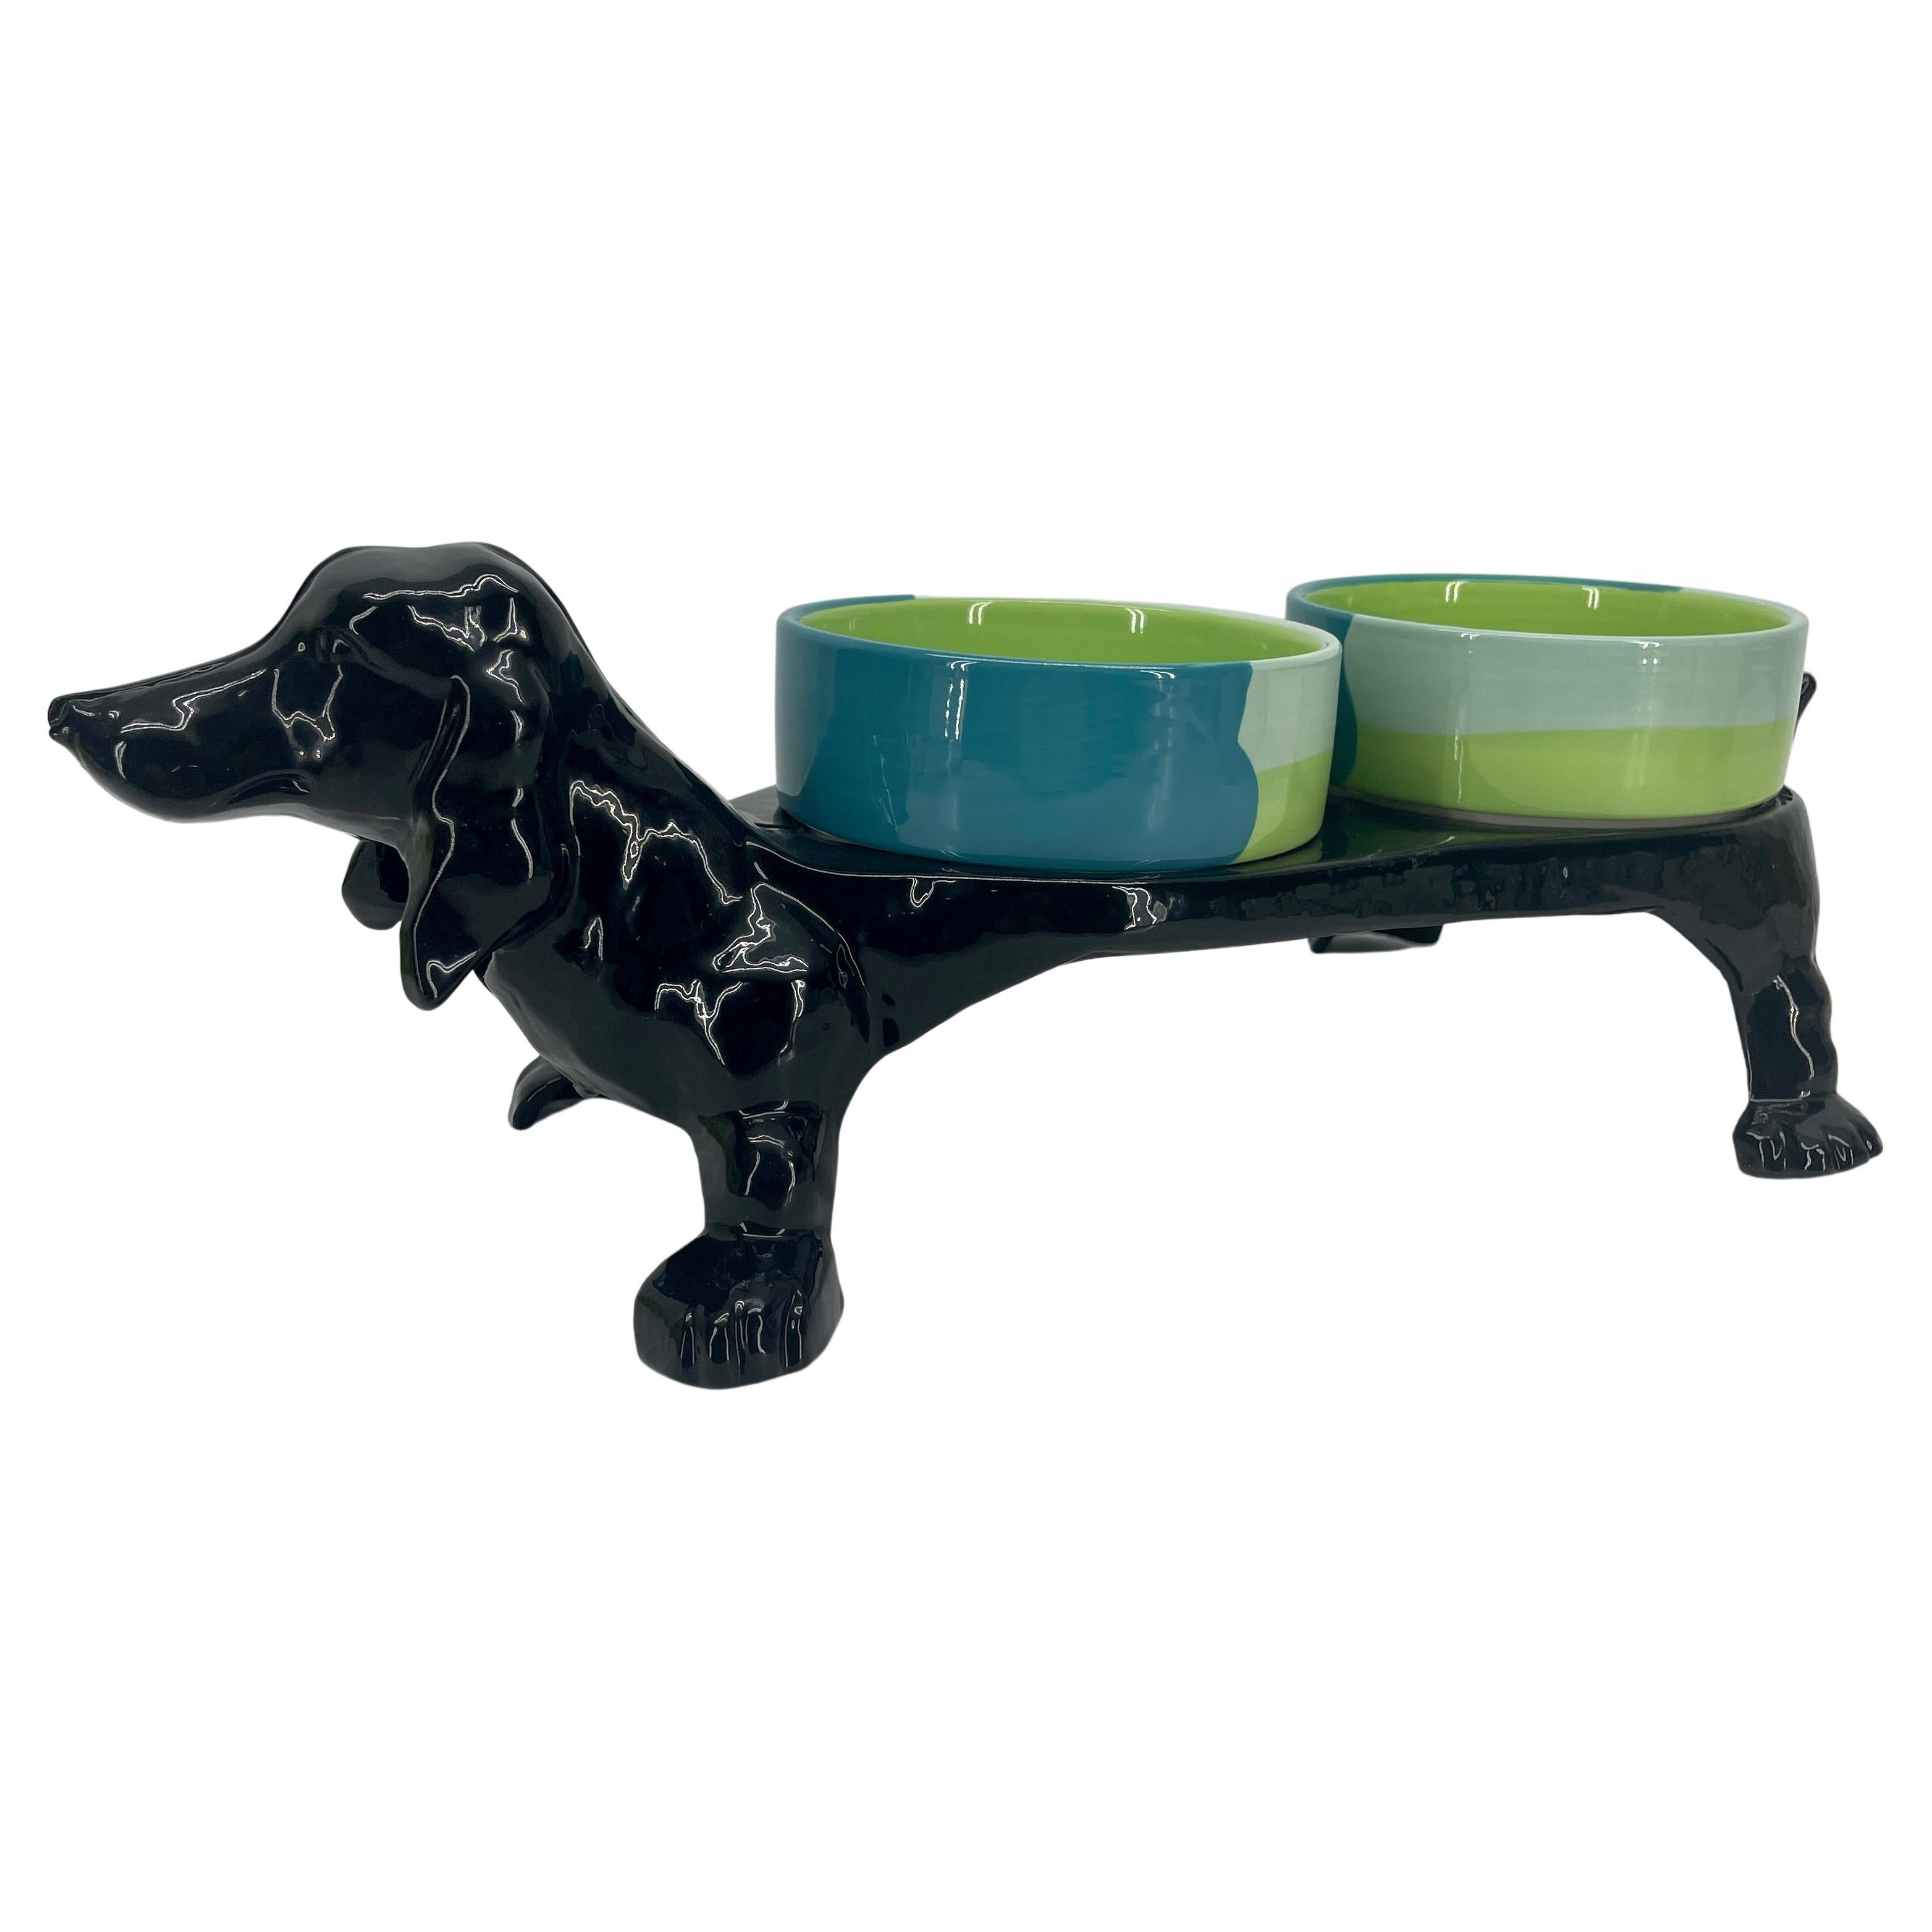 Vintage cast iron Dachshund dog bowl and feeder, circa 1920's. This nifty dog feeder holds water and food bowls fitting a variety of bowl choices. Newly powder coated in shiny black, the dachshund stands proudly ready to feed your special pup.